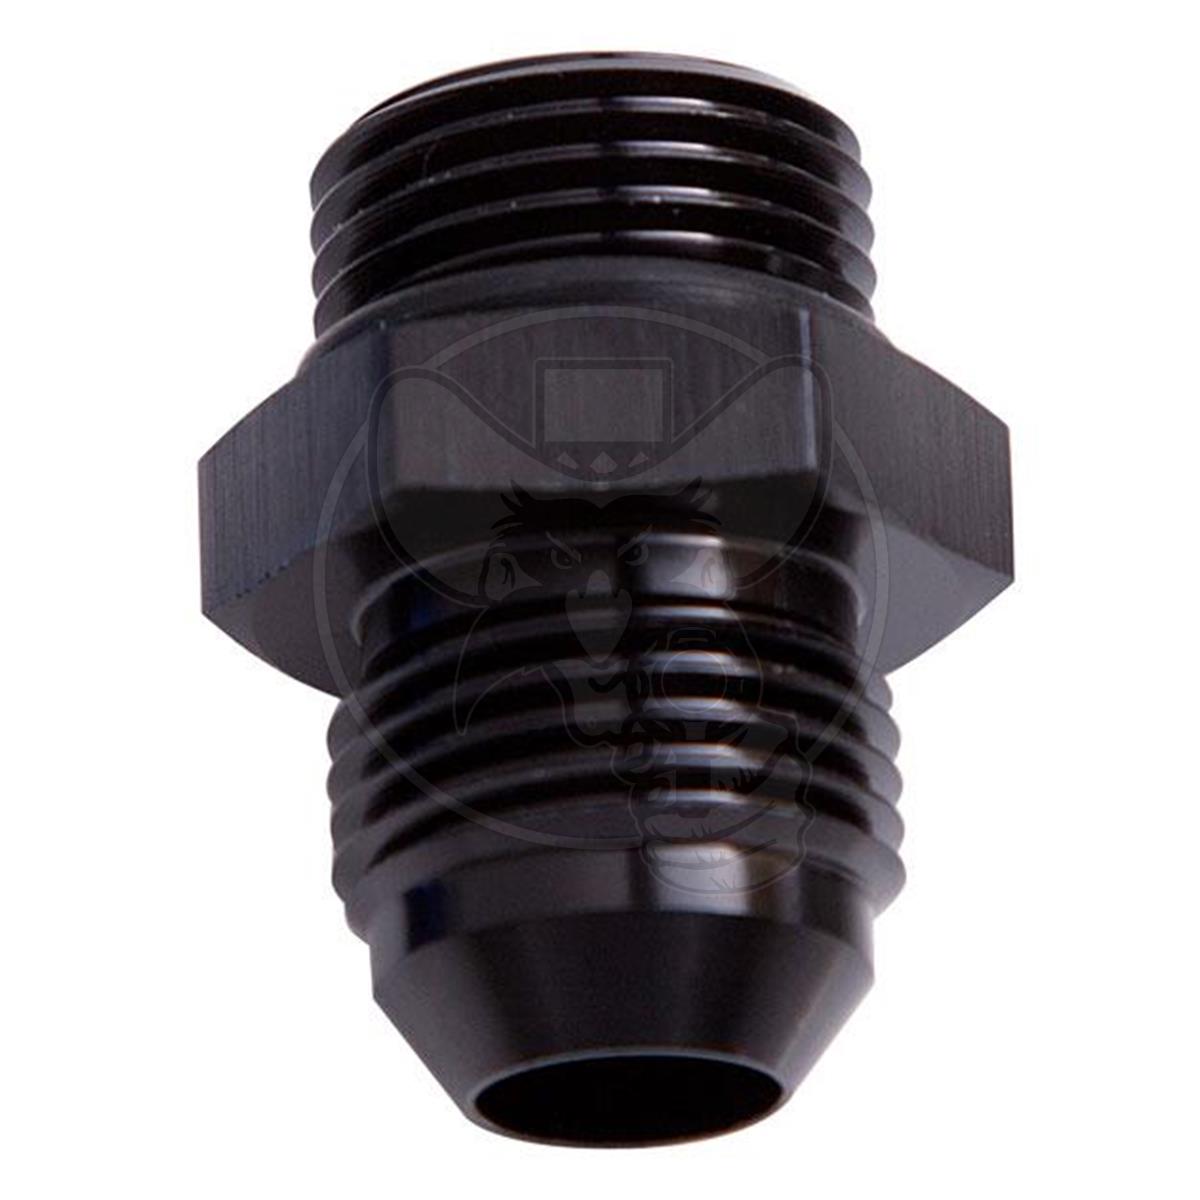 Aeroflow -10 ORB to -12AN Straight Male Flare Adapter - Black